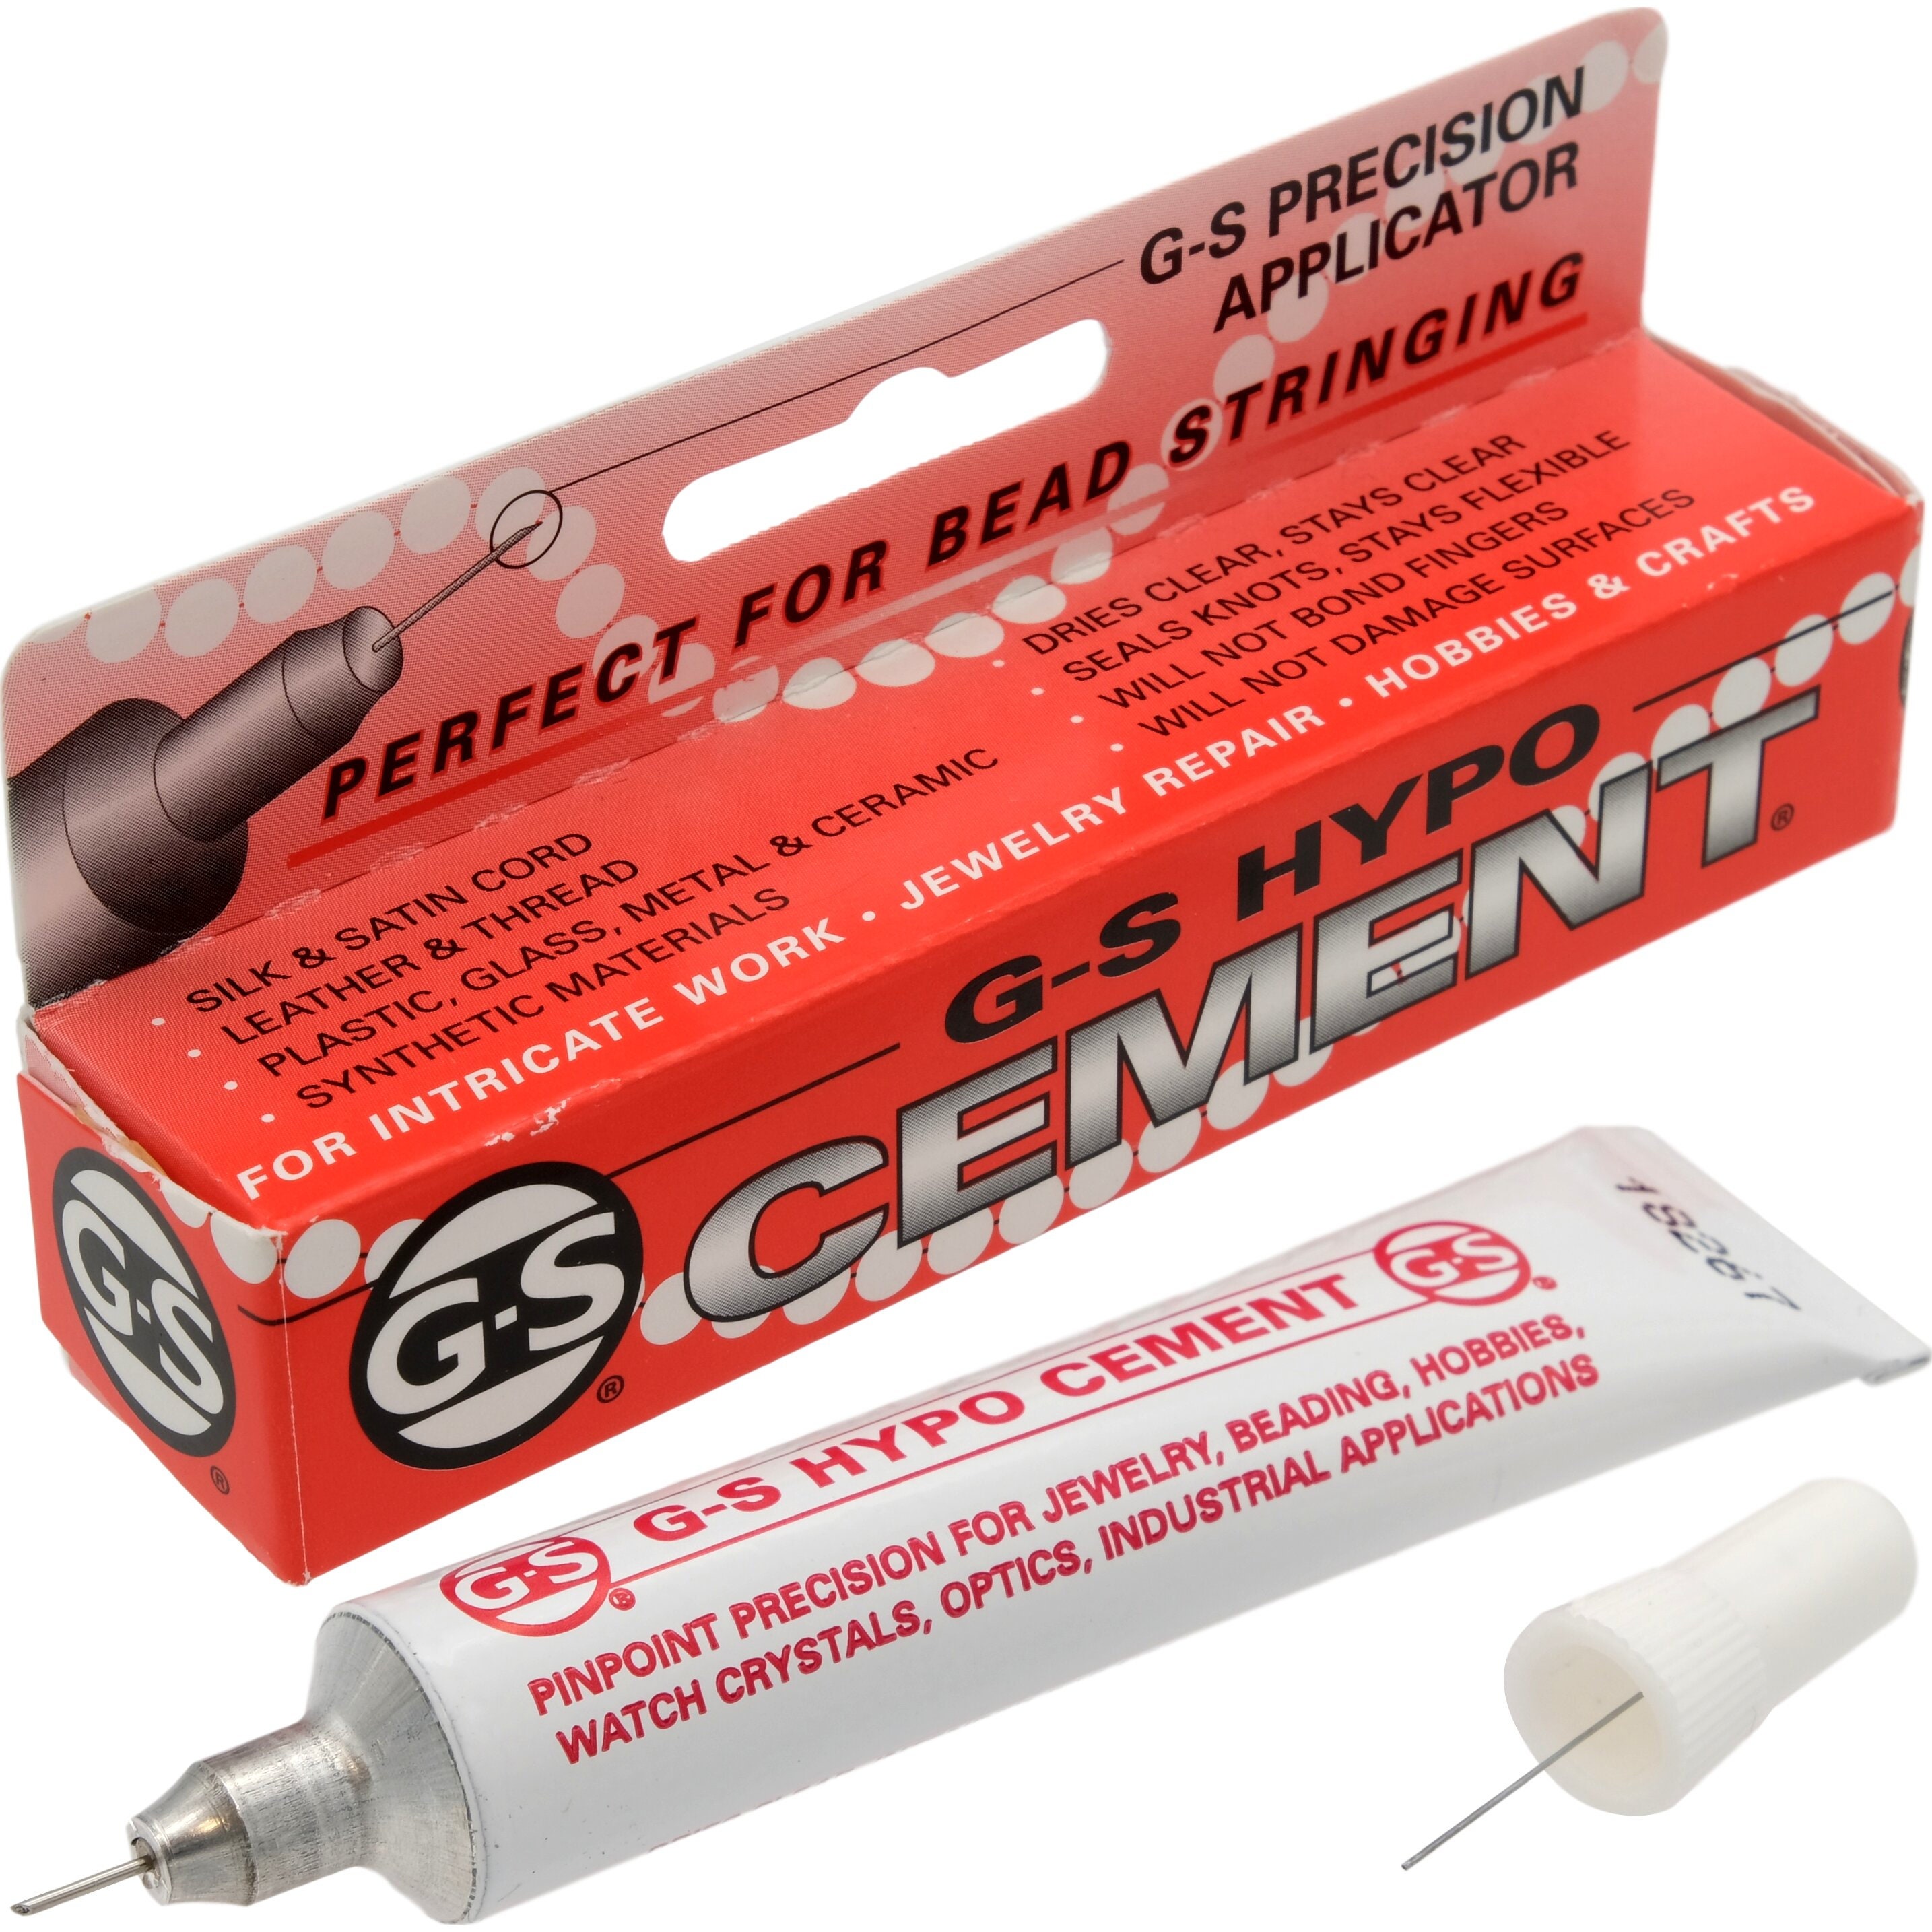 G-S Hypo Cement Glue 1/3 Fl. Oz. PINPOINT PRECISION Dries Clear, Stays  Clear Will Not Bond Fingers Jewelry Watch Repair Rhinestones More 